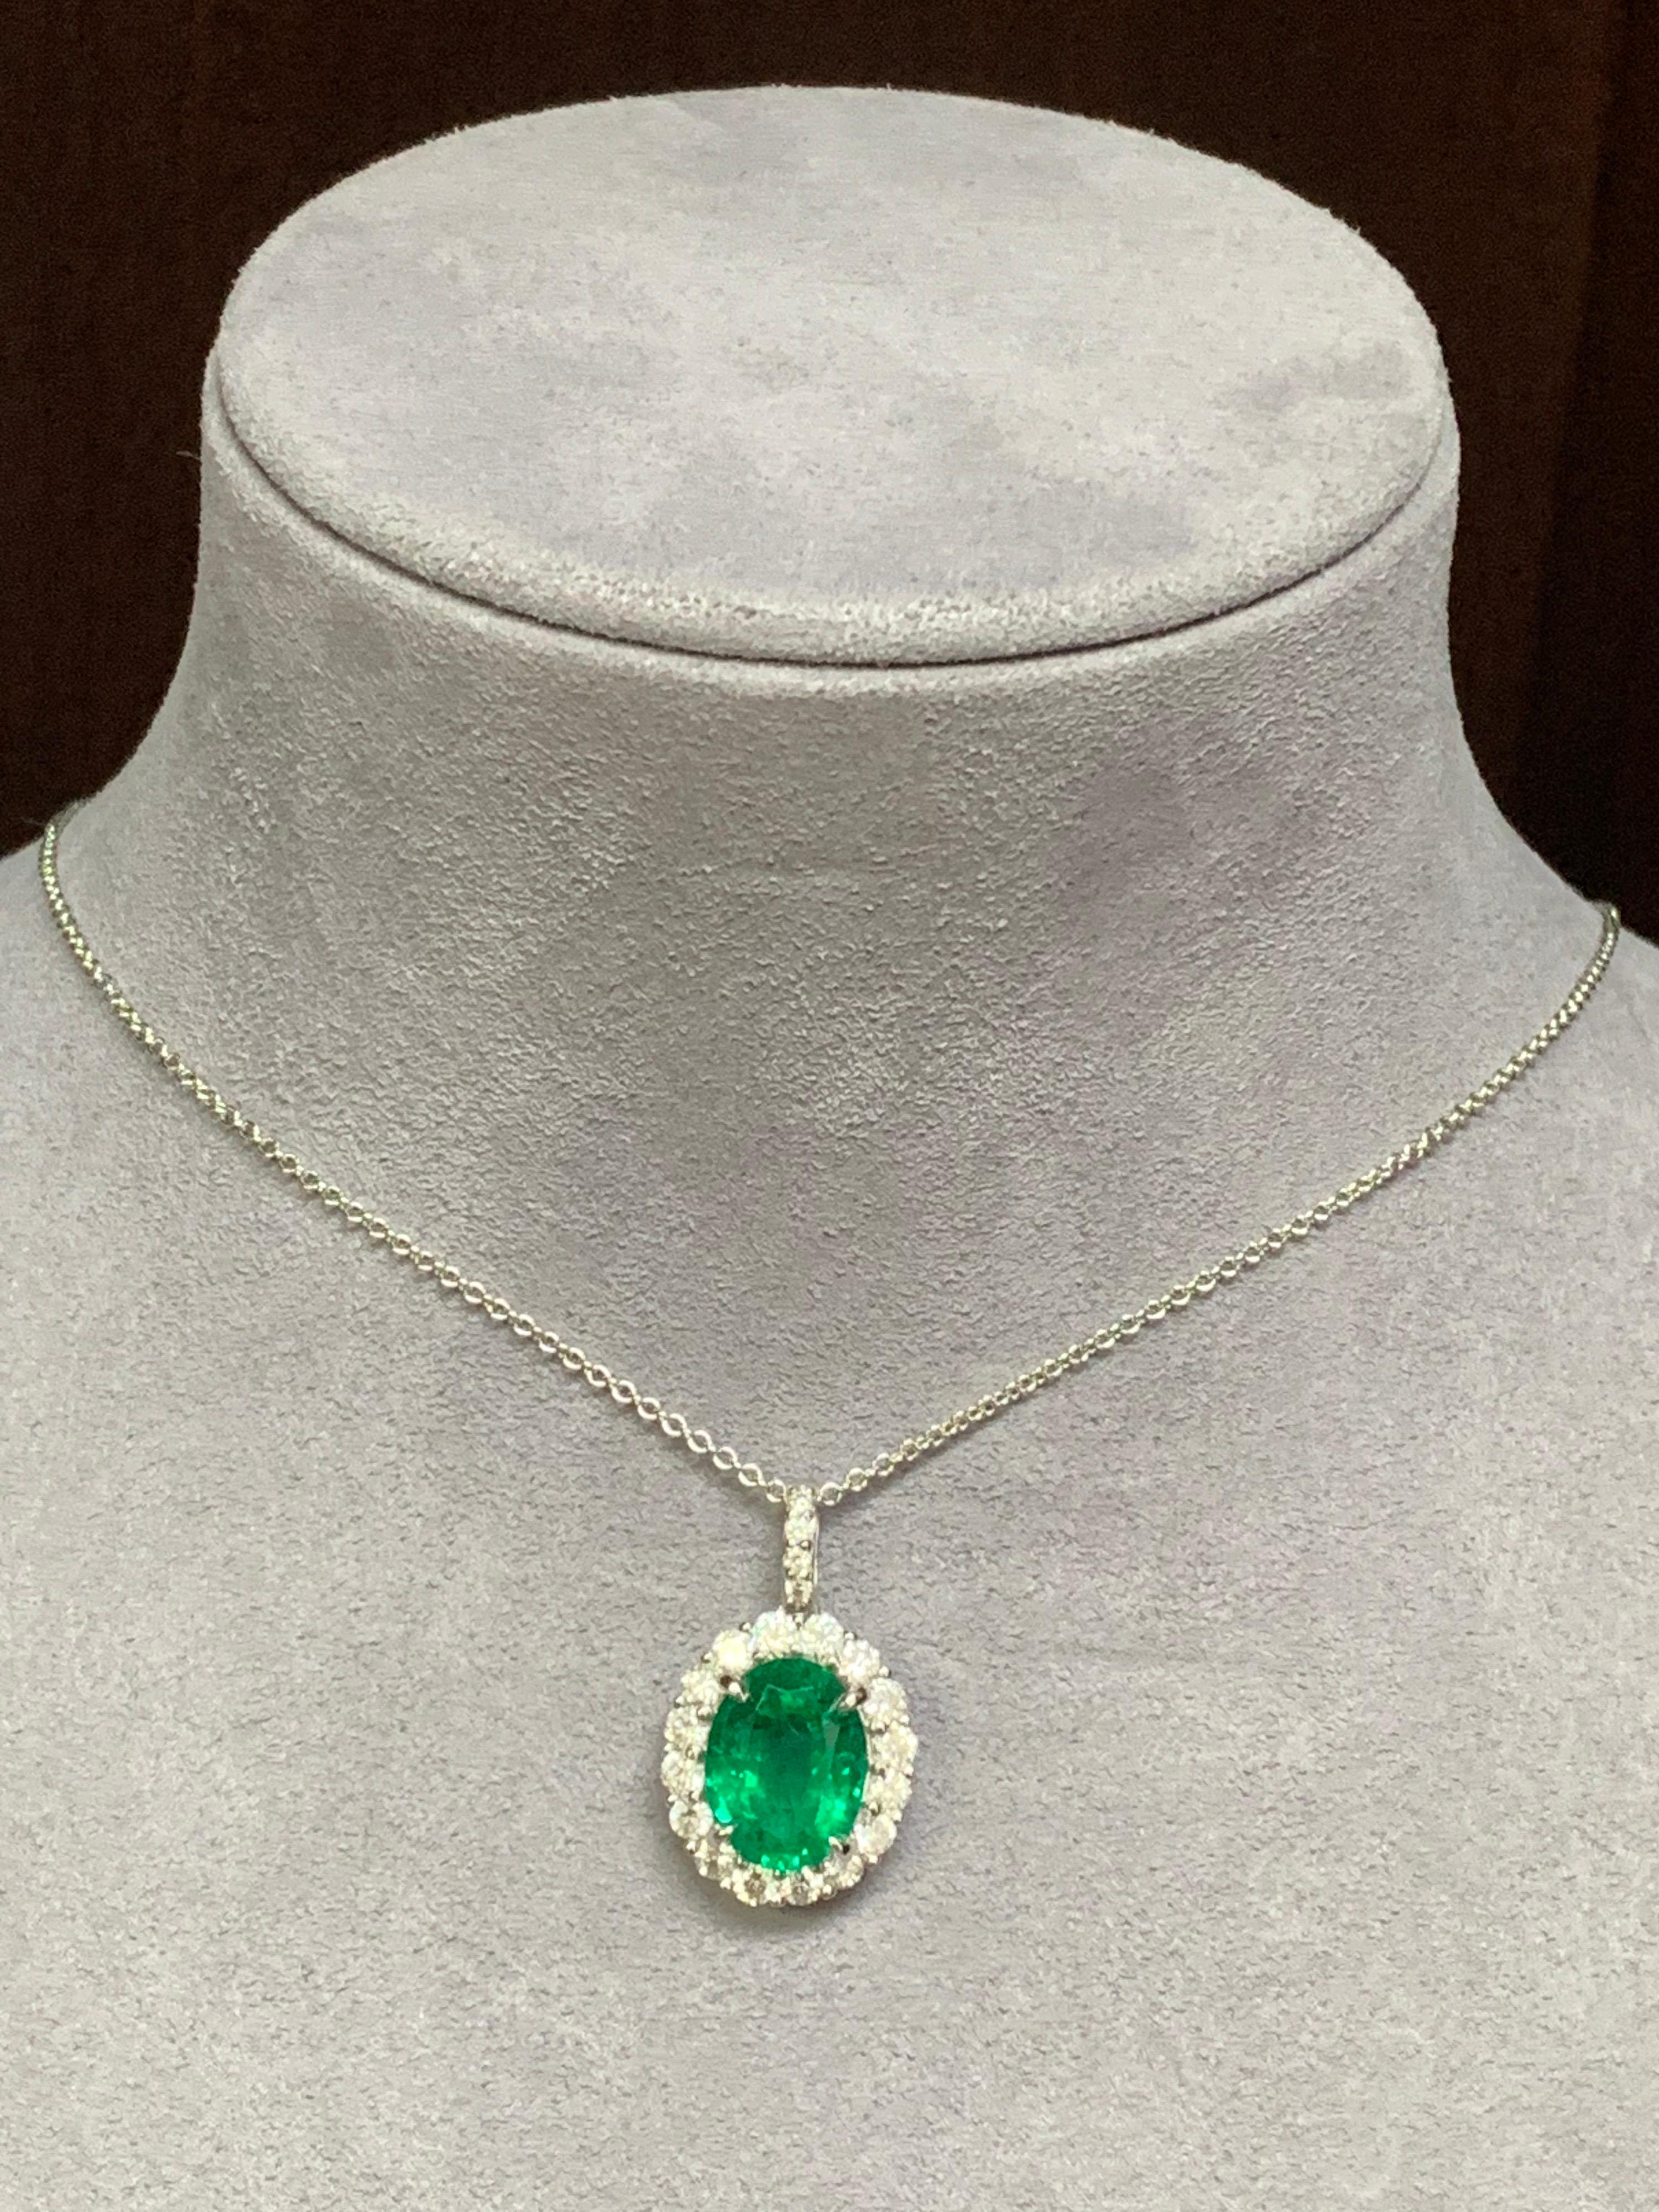 Women's or Men's Auction - GIA Certified 3.53 Carat Oval Emerald and Diamond Pendant For Sale